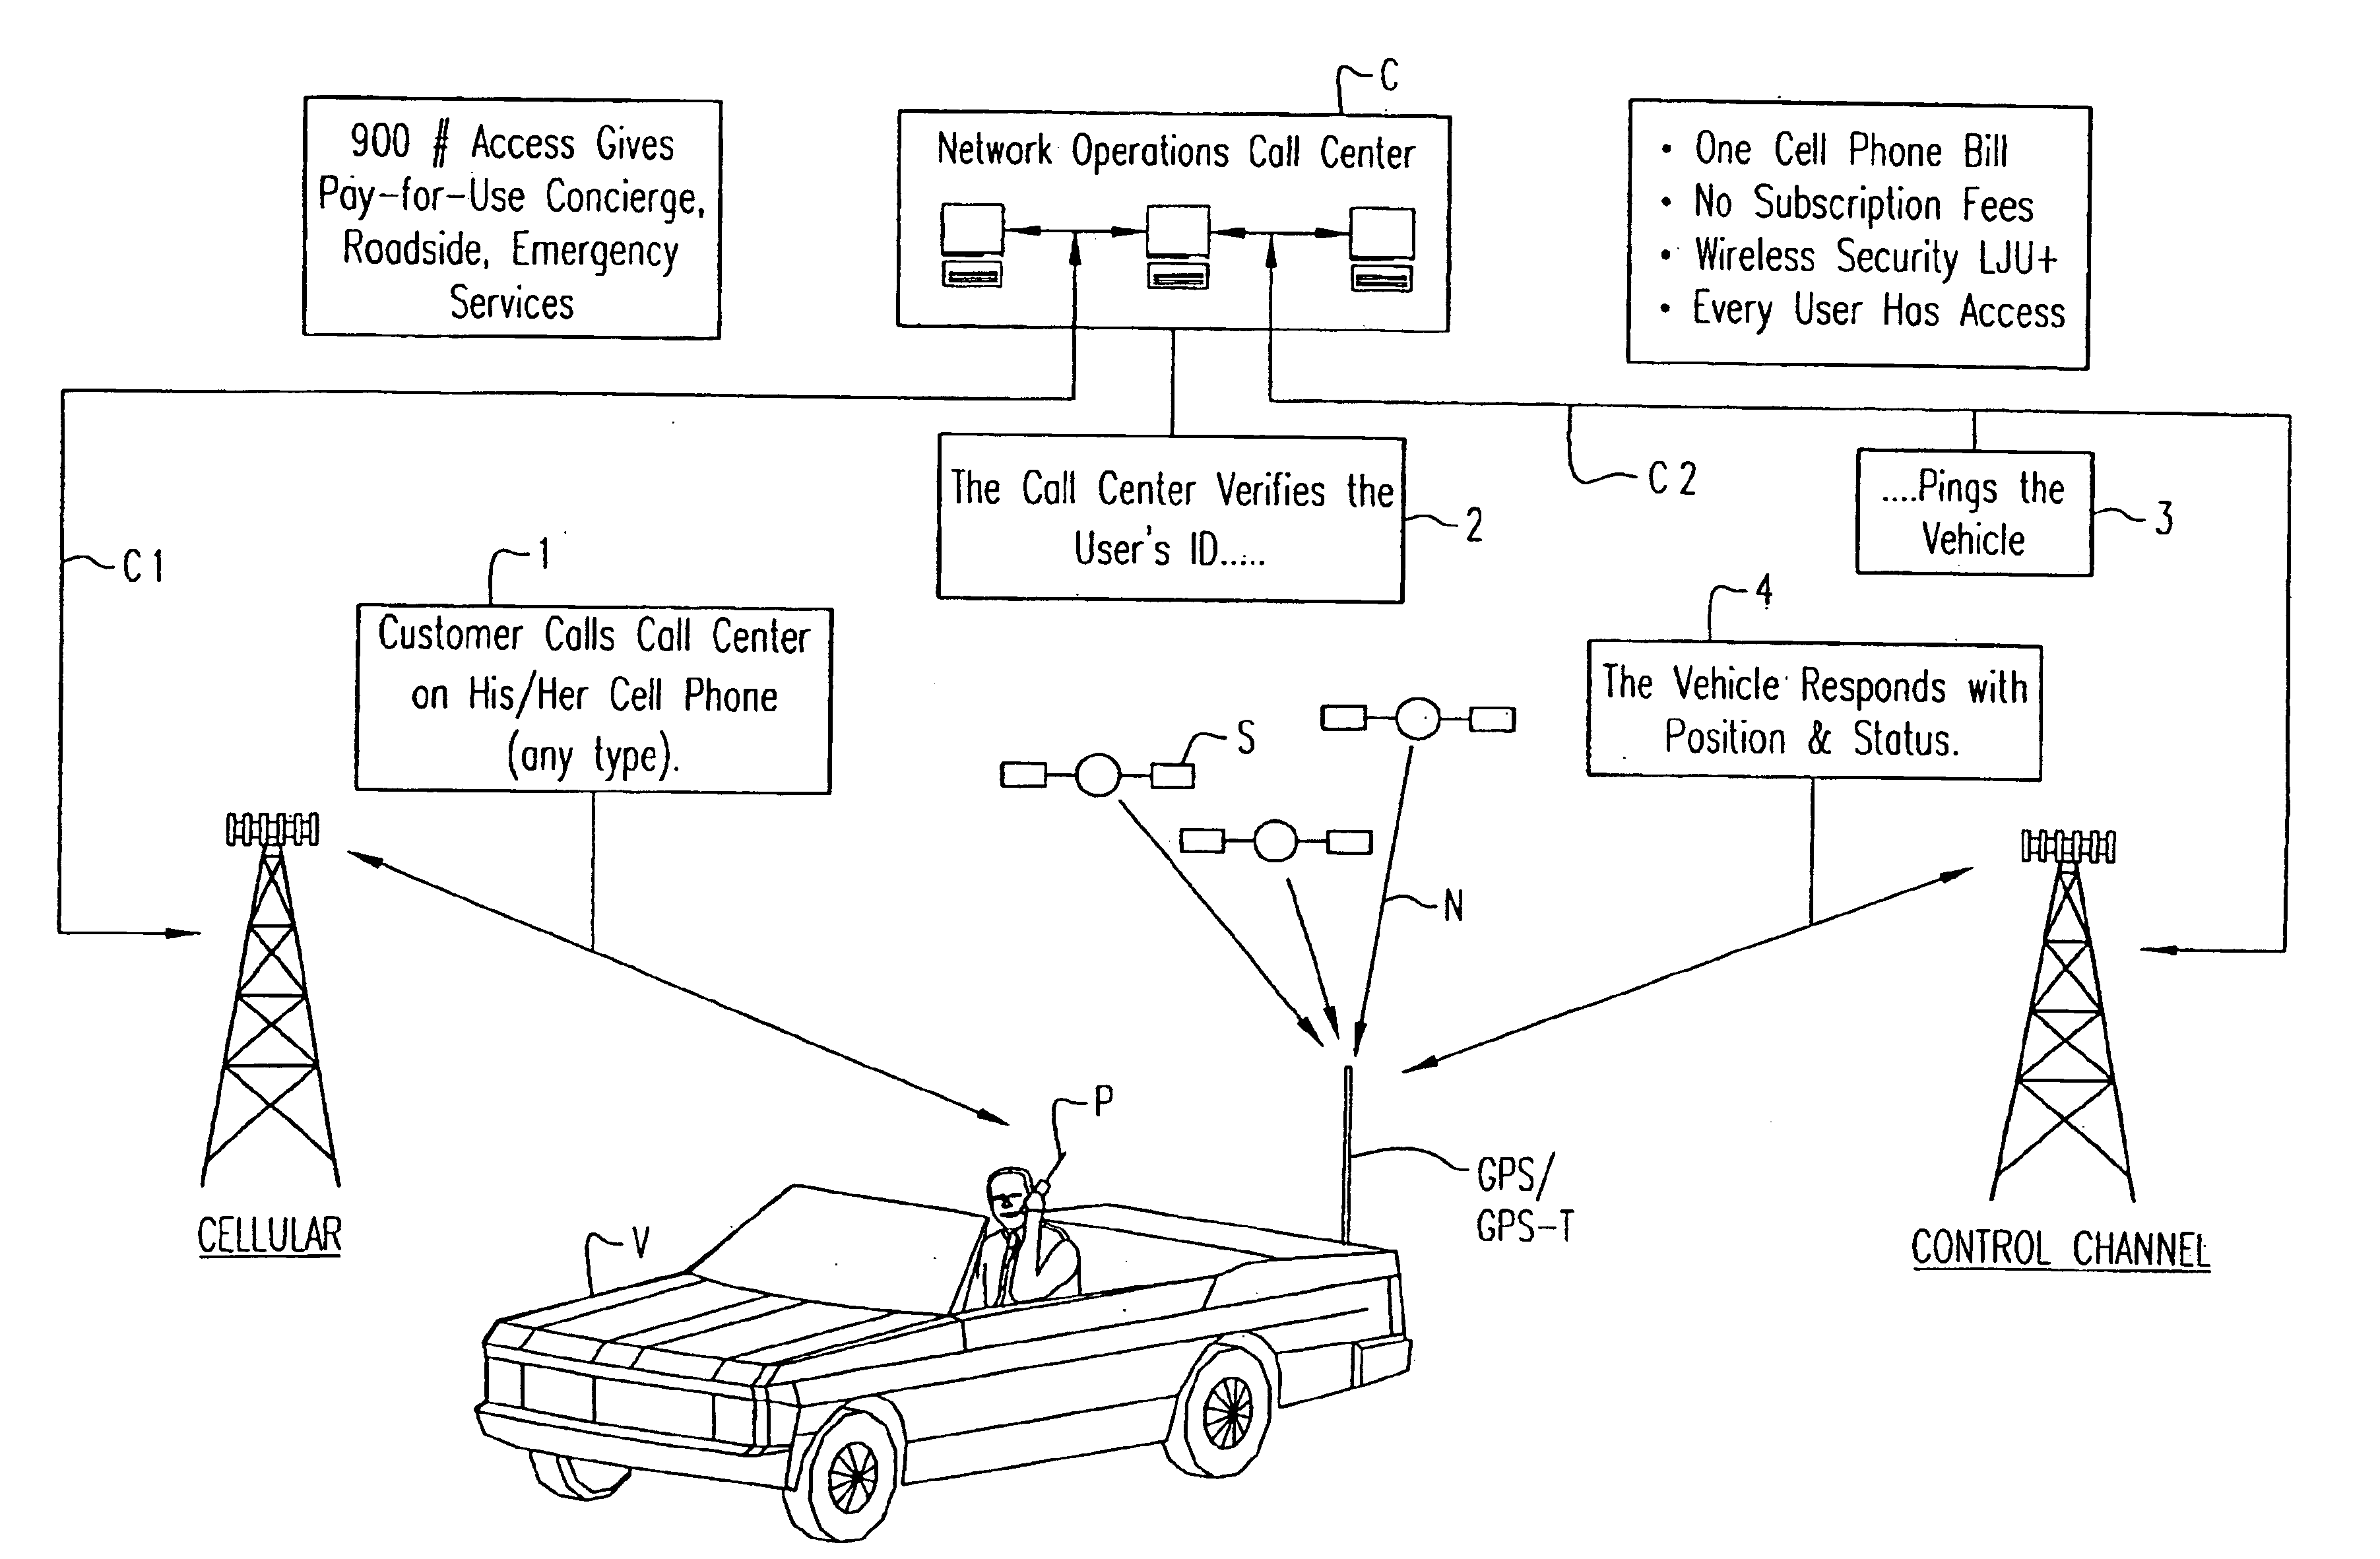 Methods of and system for portable cellular phone voice communication and positional location data communication using the cellular phone network control channel